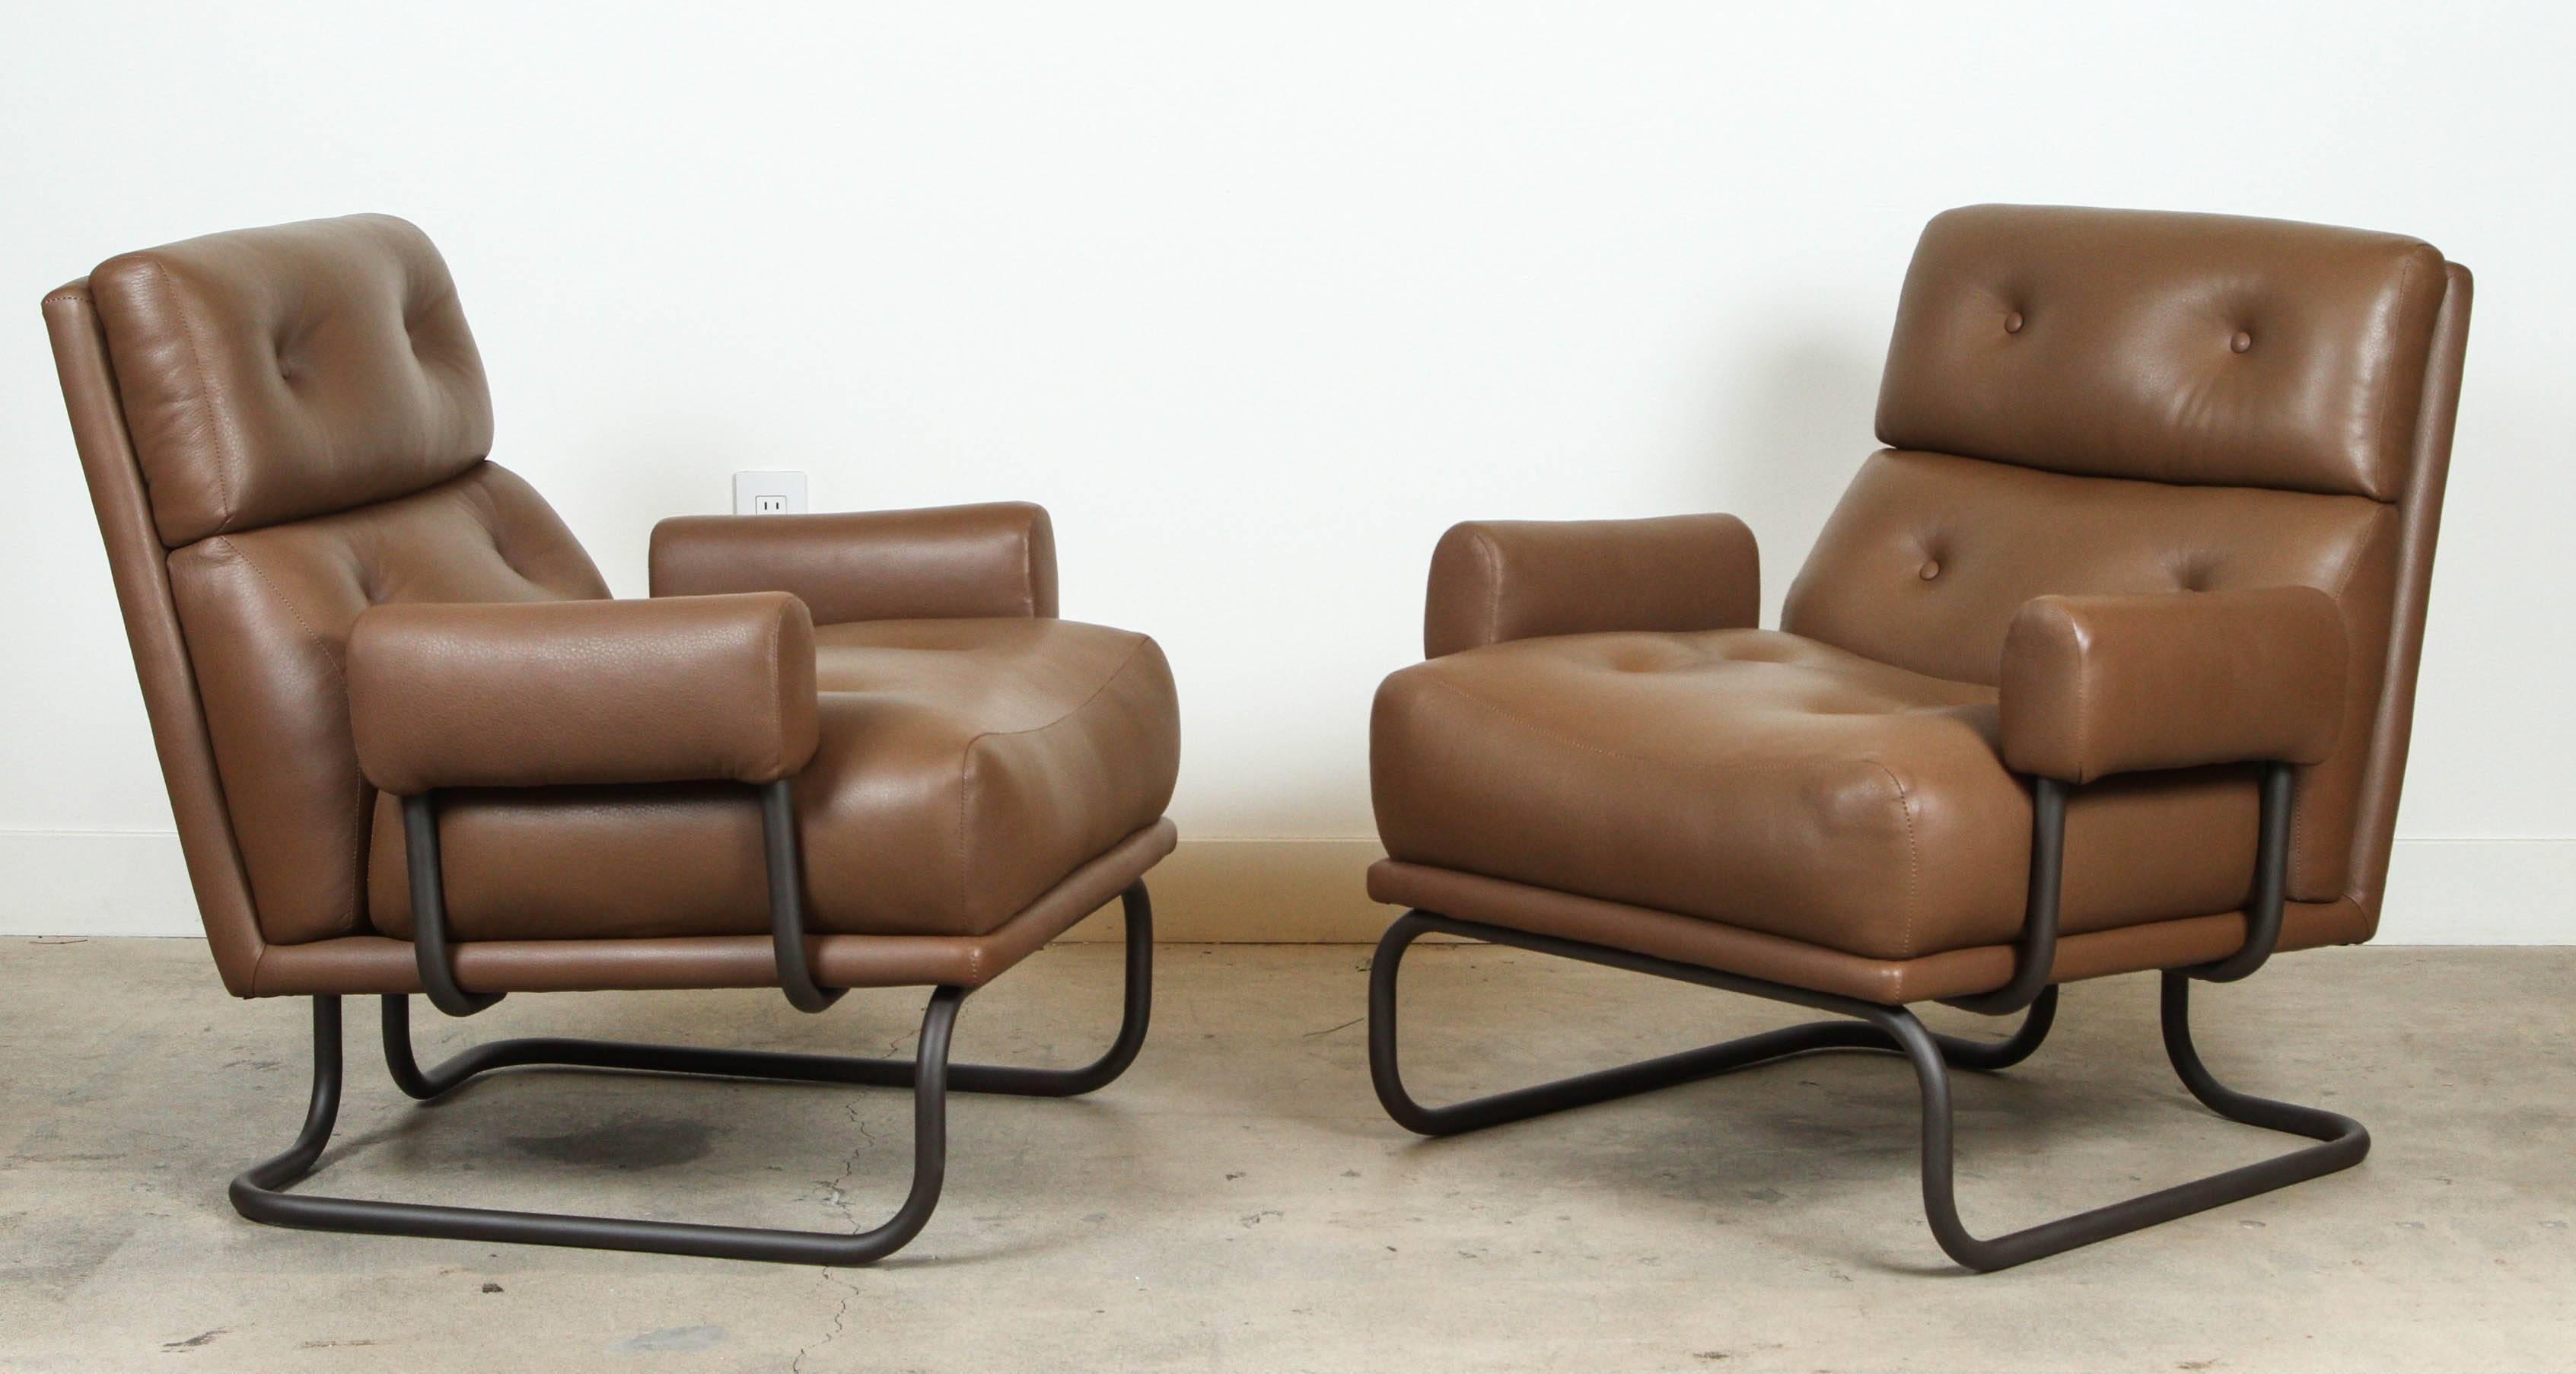 Pair of bronze and leather chairs for Stendig.